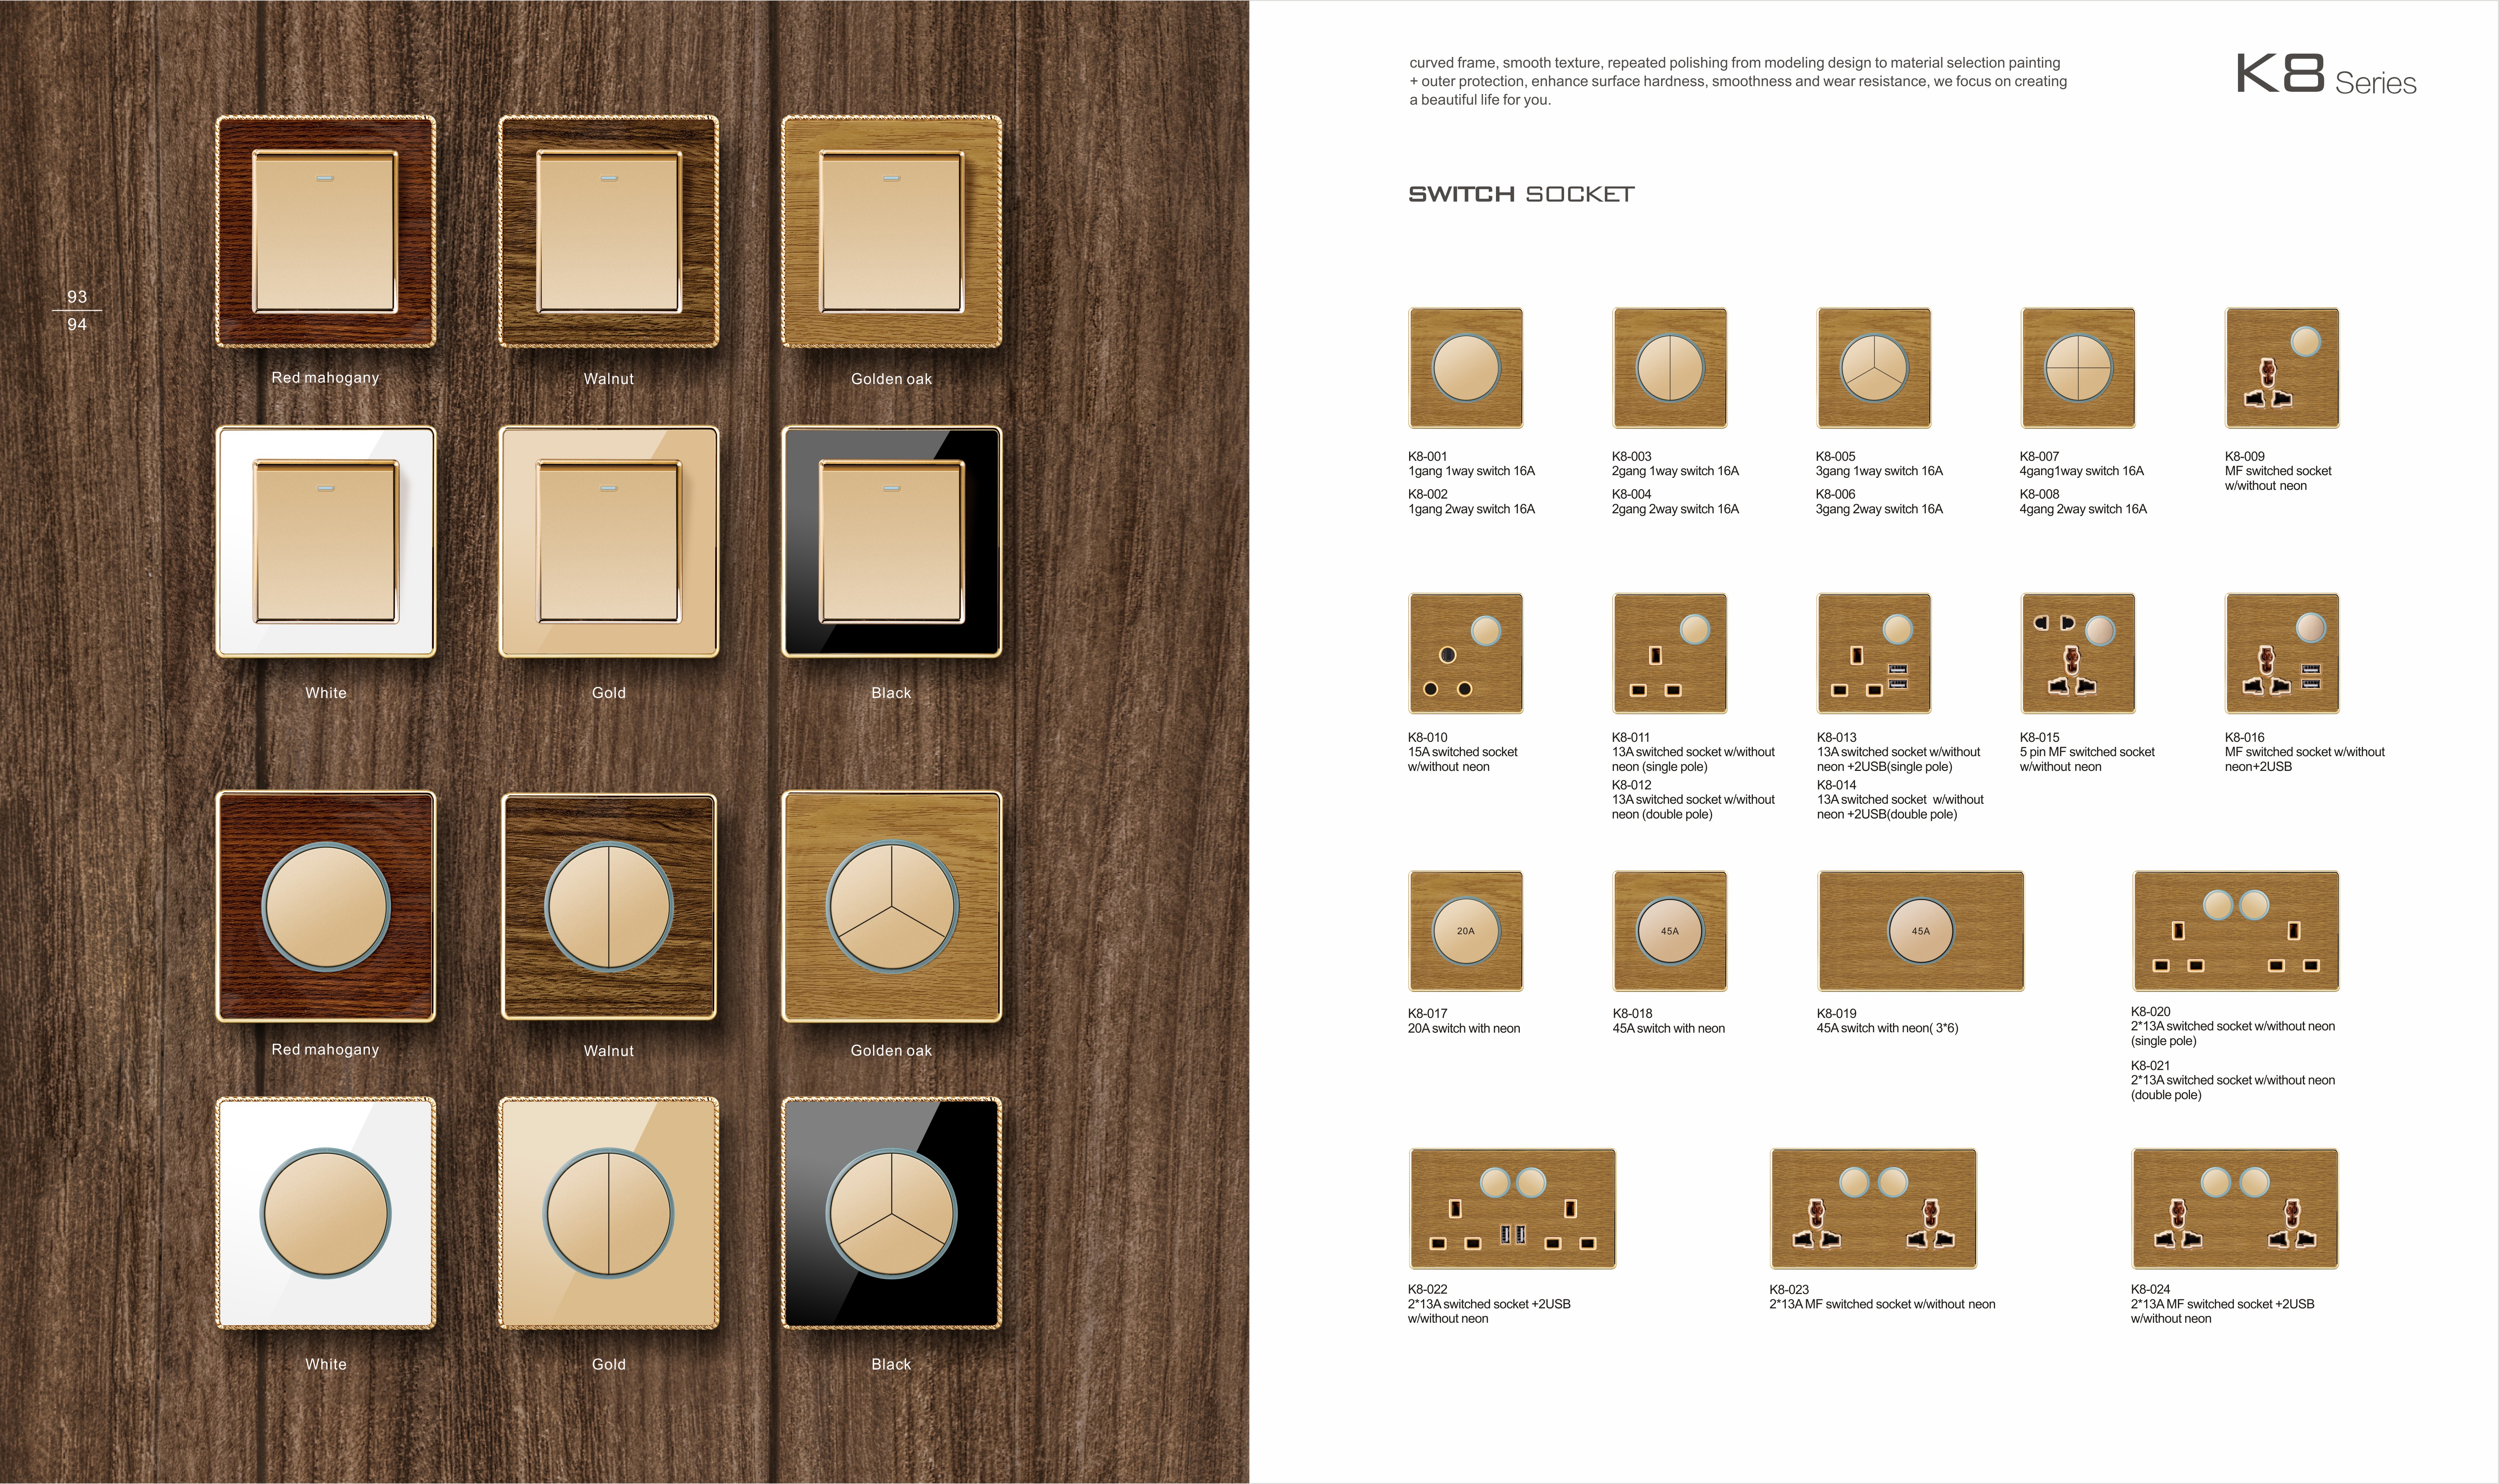 K8 Series Acrylic Wooden 3G 16A 250V Light Electric Wall Switch Socket 86*86cm PC Material with Chrome Frame Home Switches Twist Pattern